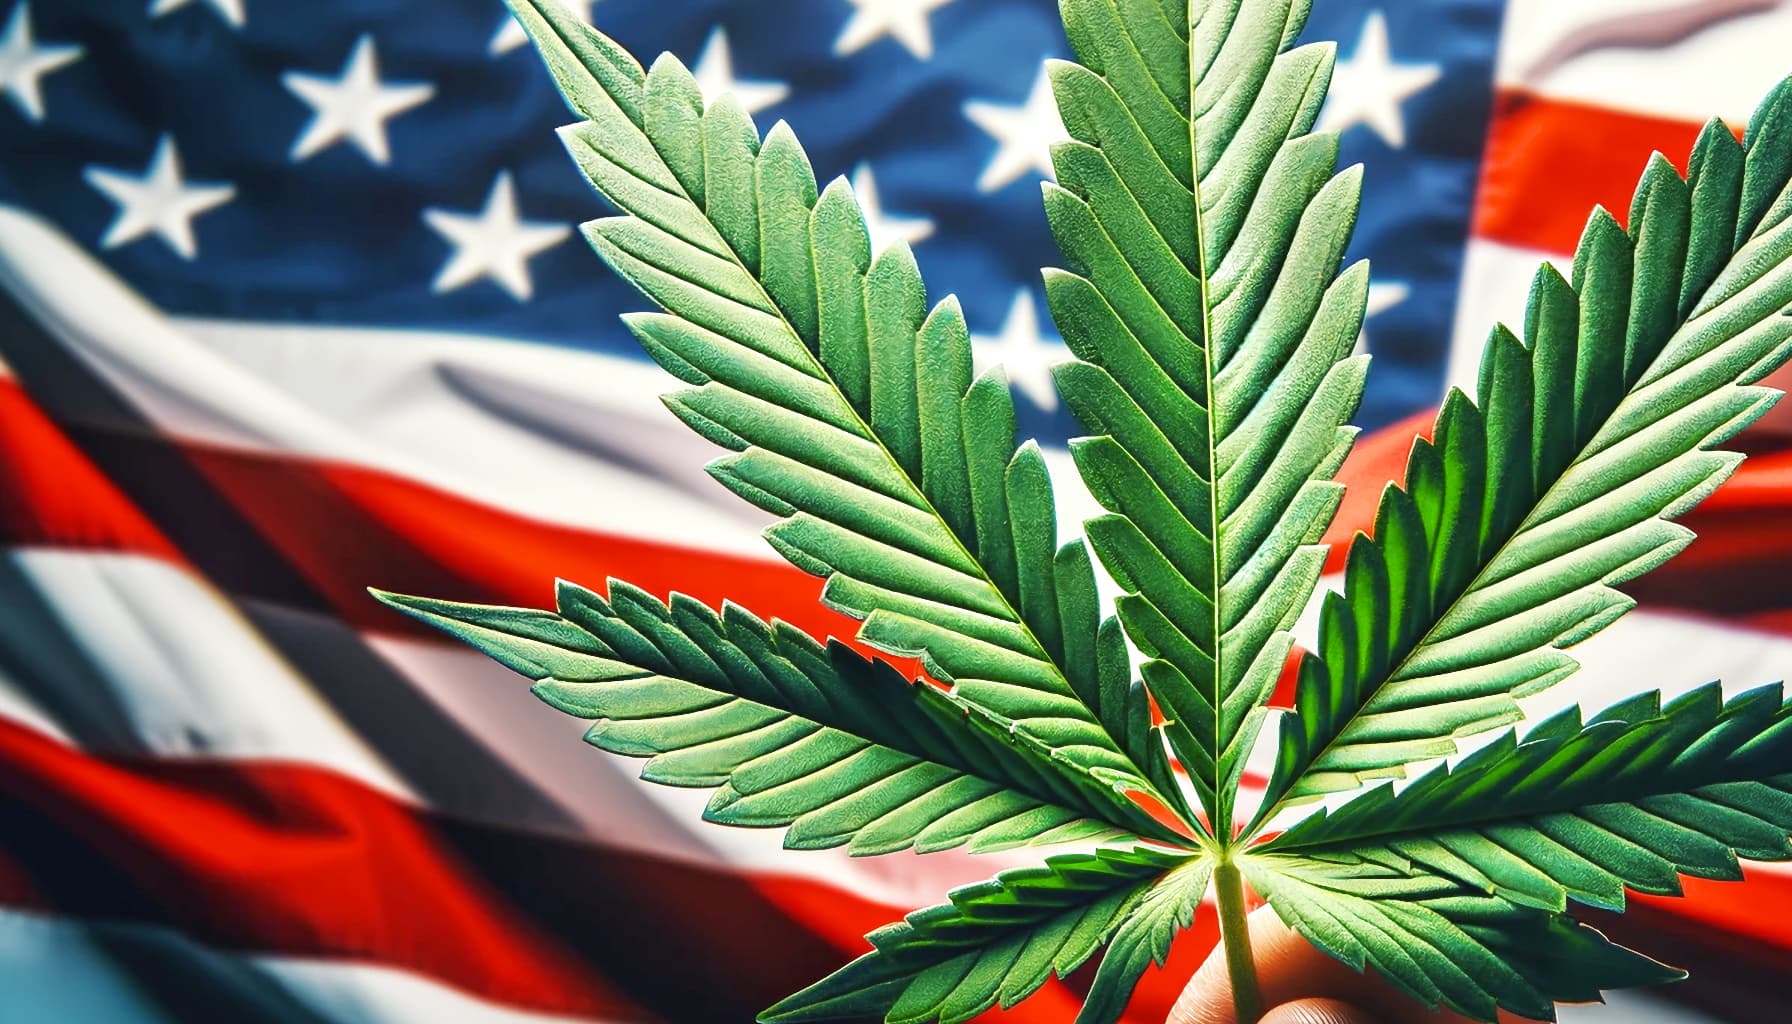 Reclassification of cannabis is supported by the US Justice Department